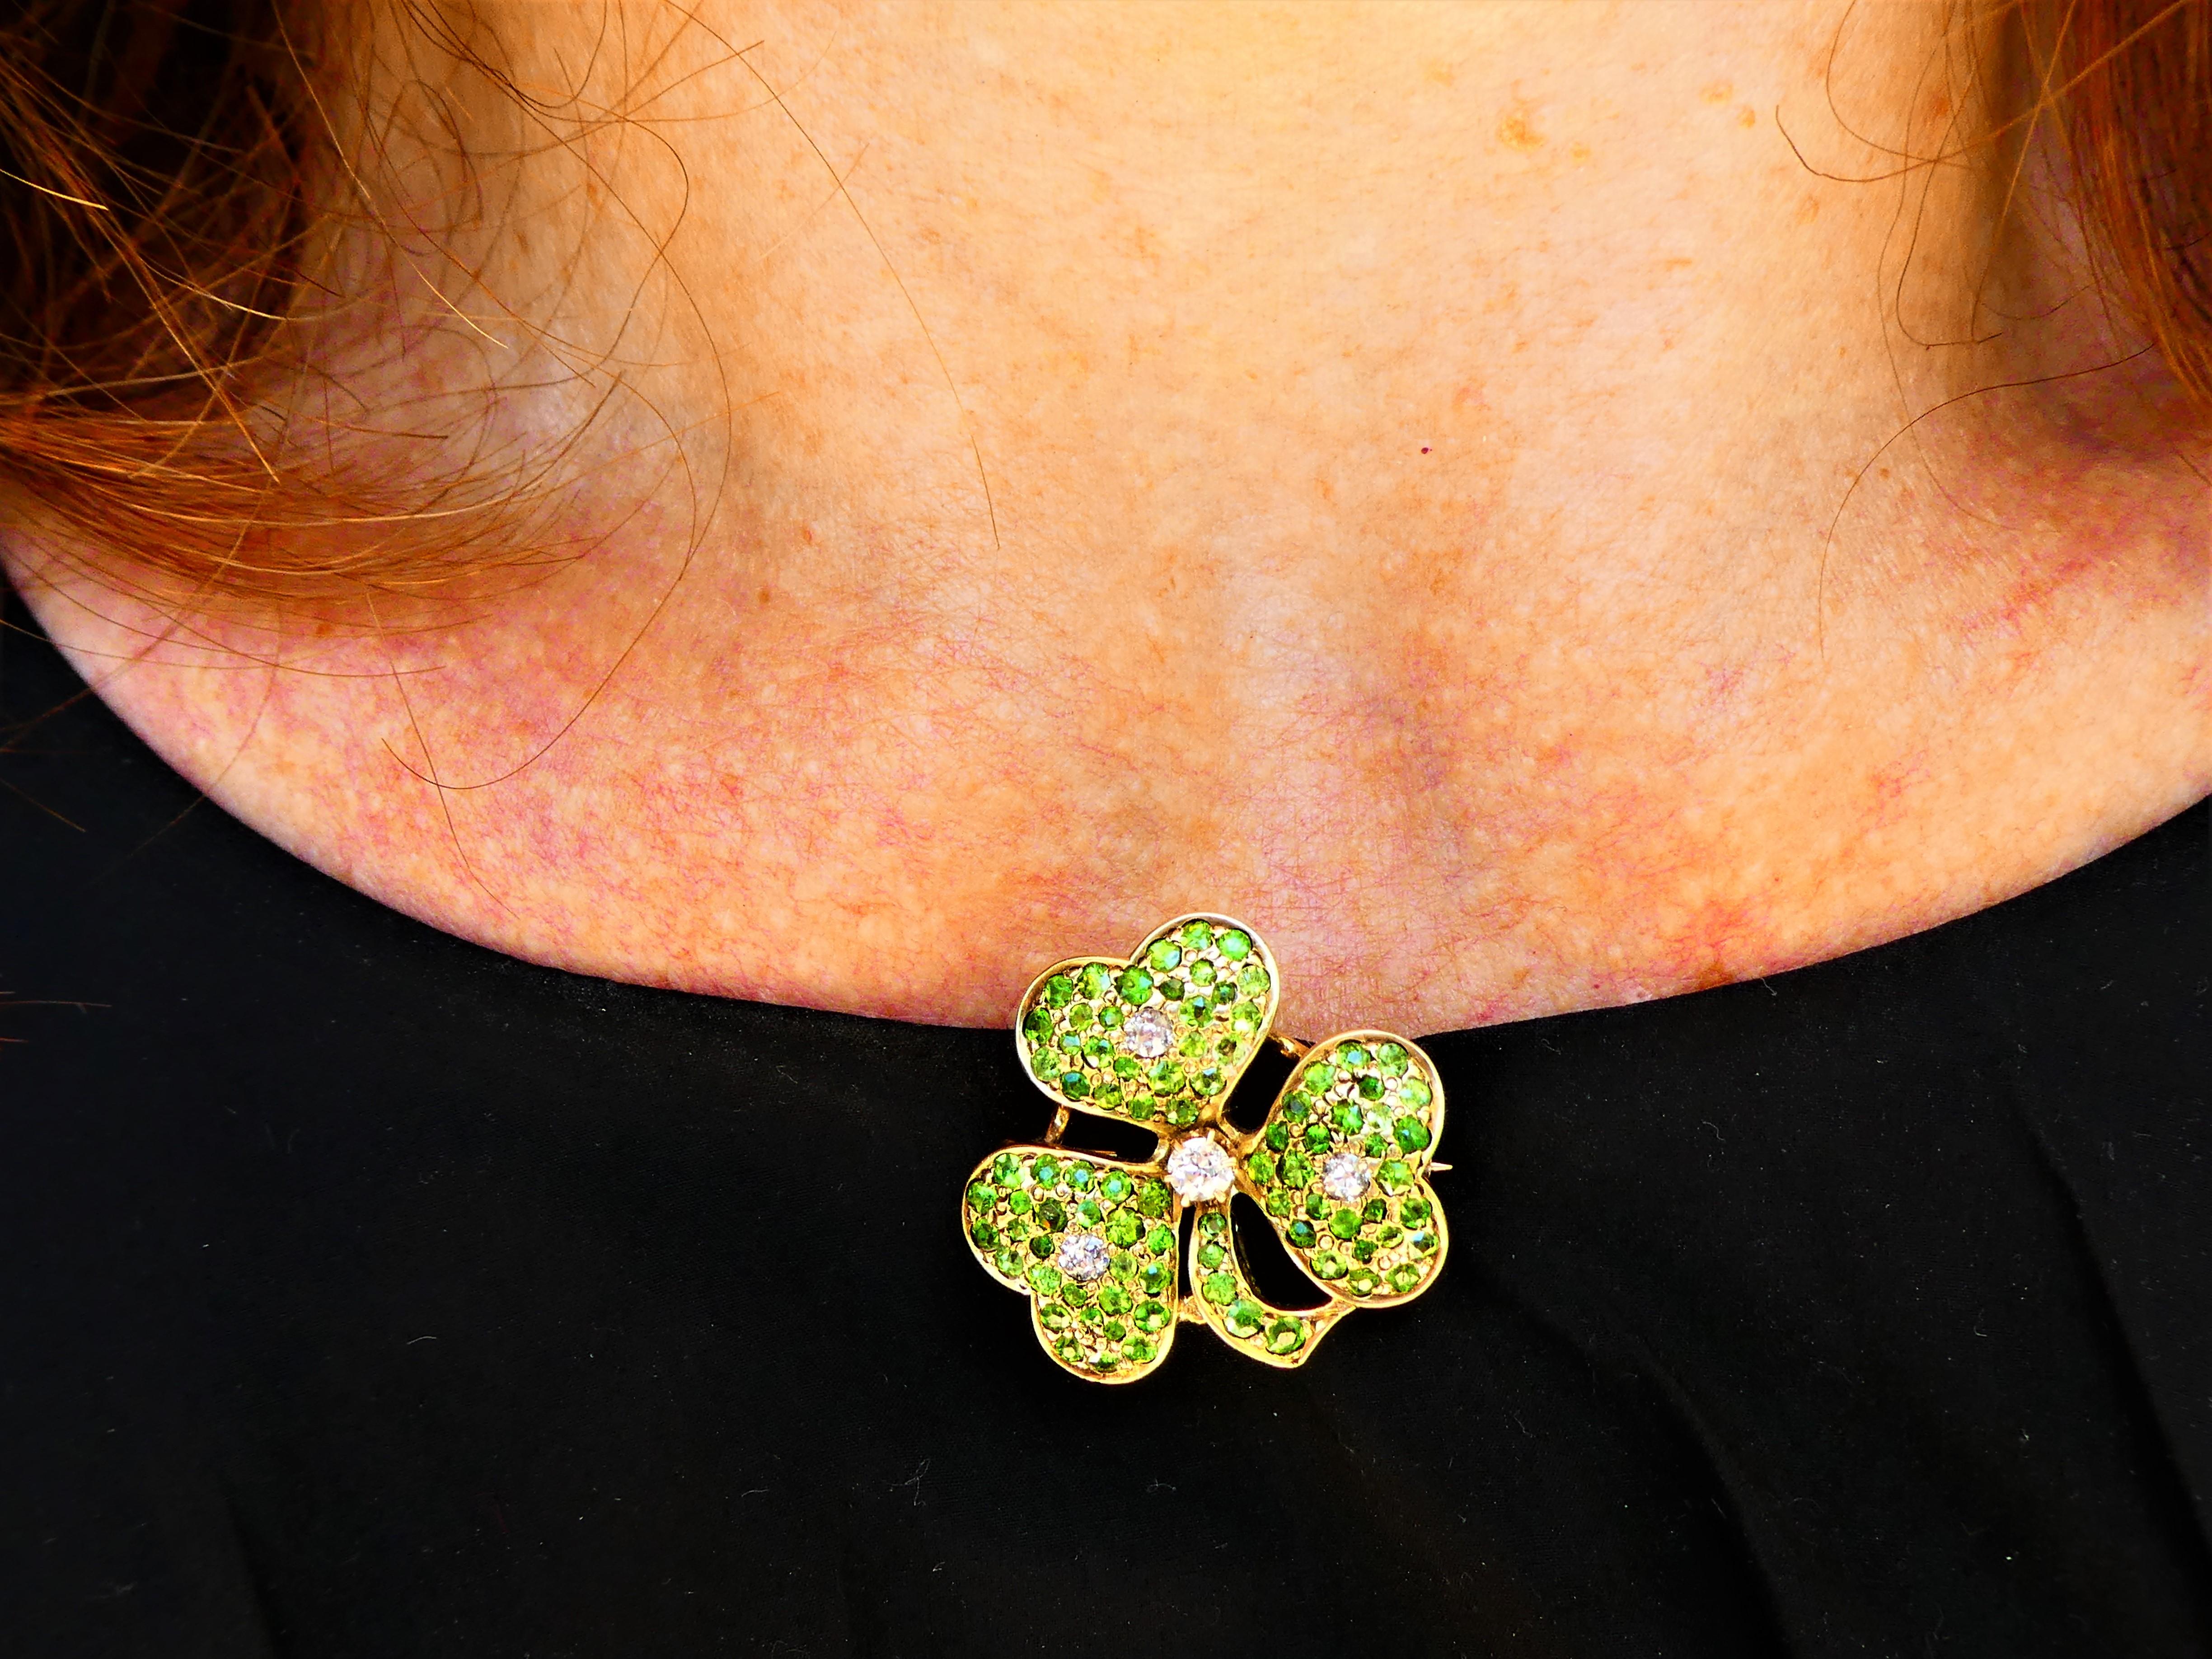 This lovely brooch was crafted around 1900 in 14 karat yellow gold in the shape of a shamrock with three leaves. The rare green demantoid garnets are pavé set and each leave has one round diamond in the center. The largest diamond is located between